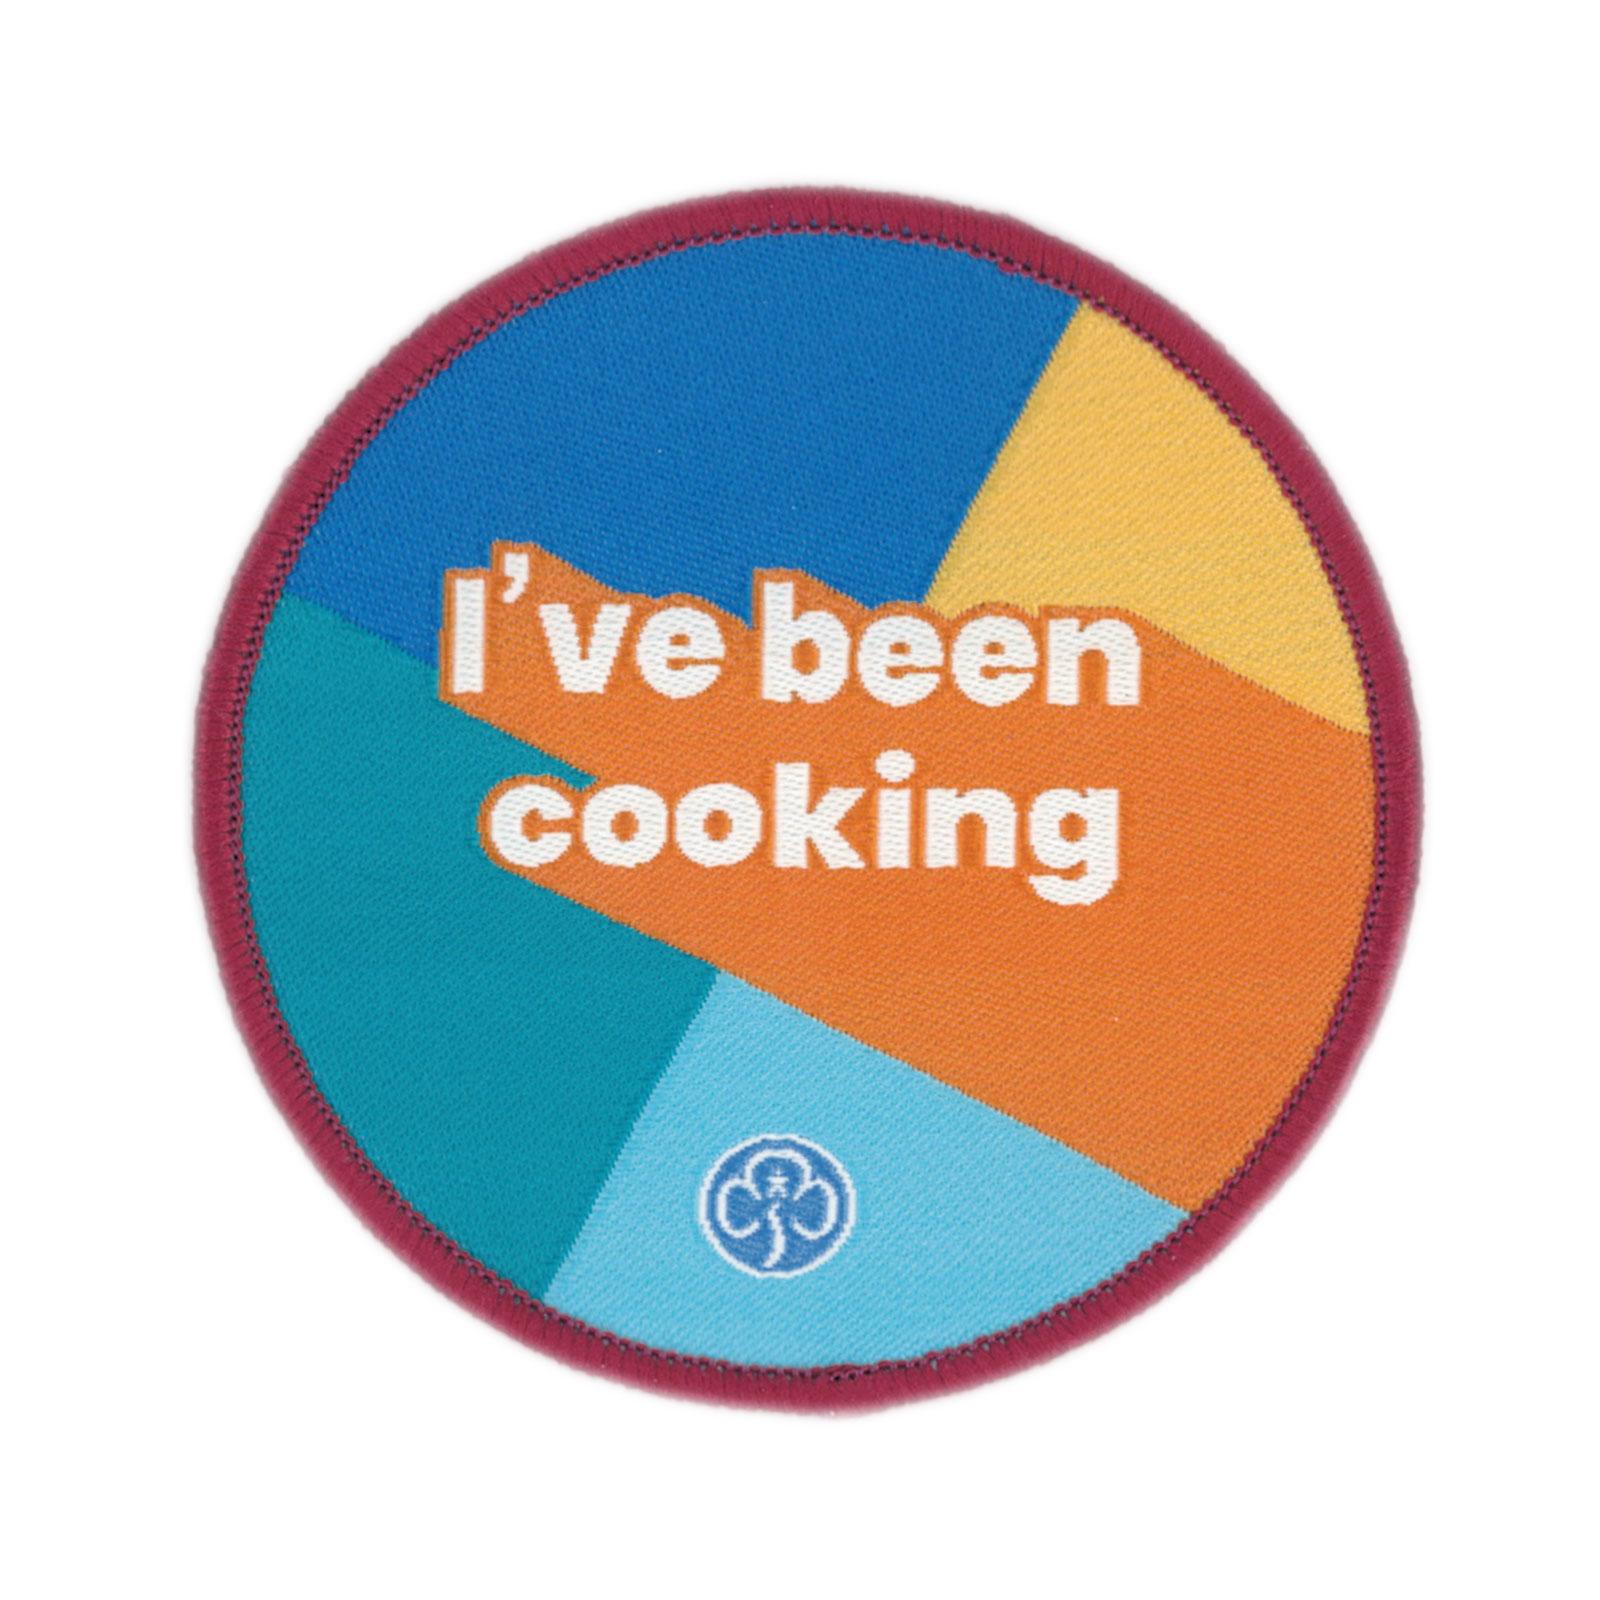 I've Been Cooking Woven Badge- All sections